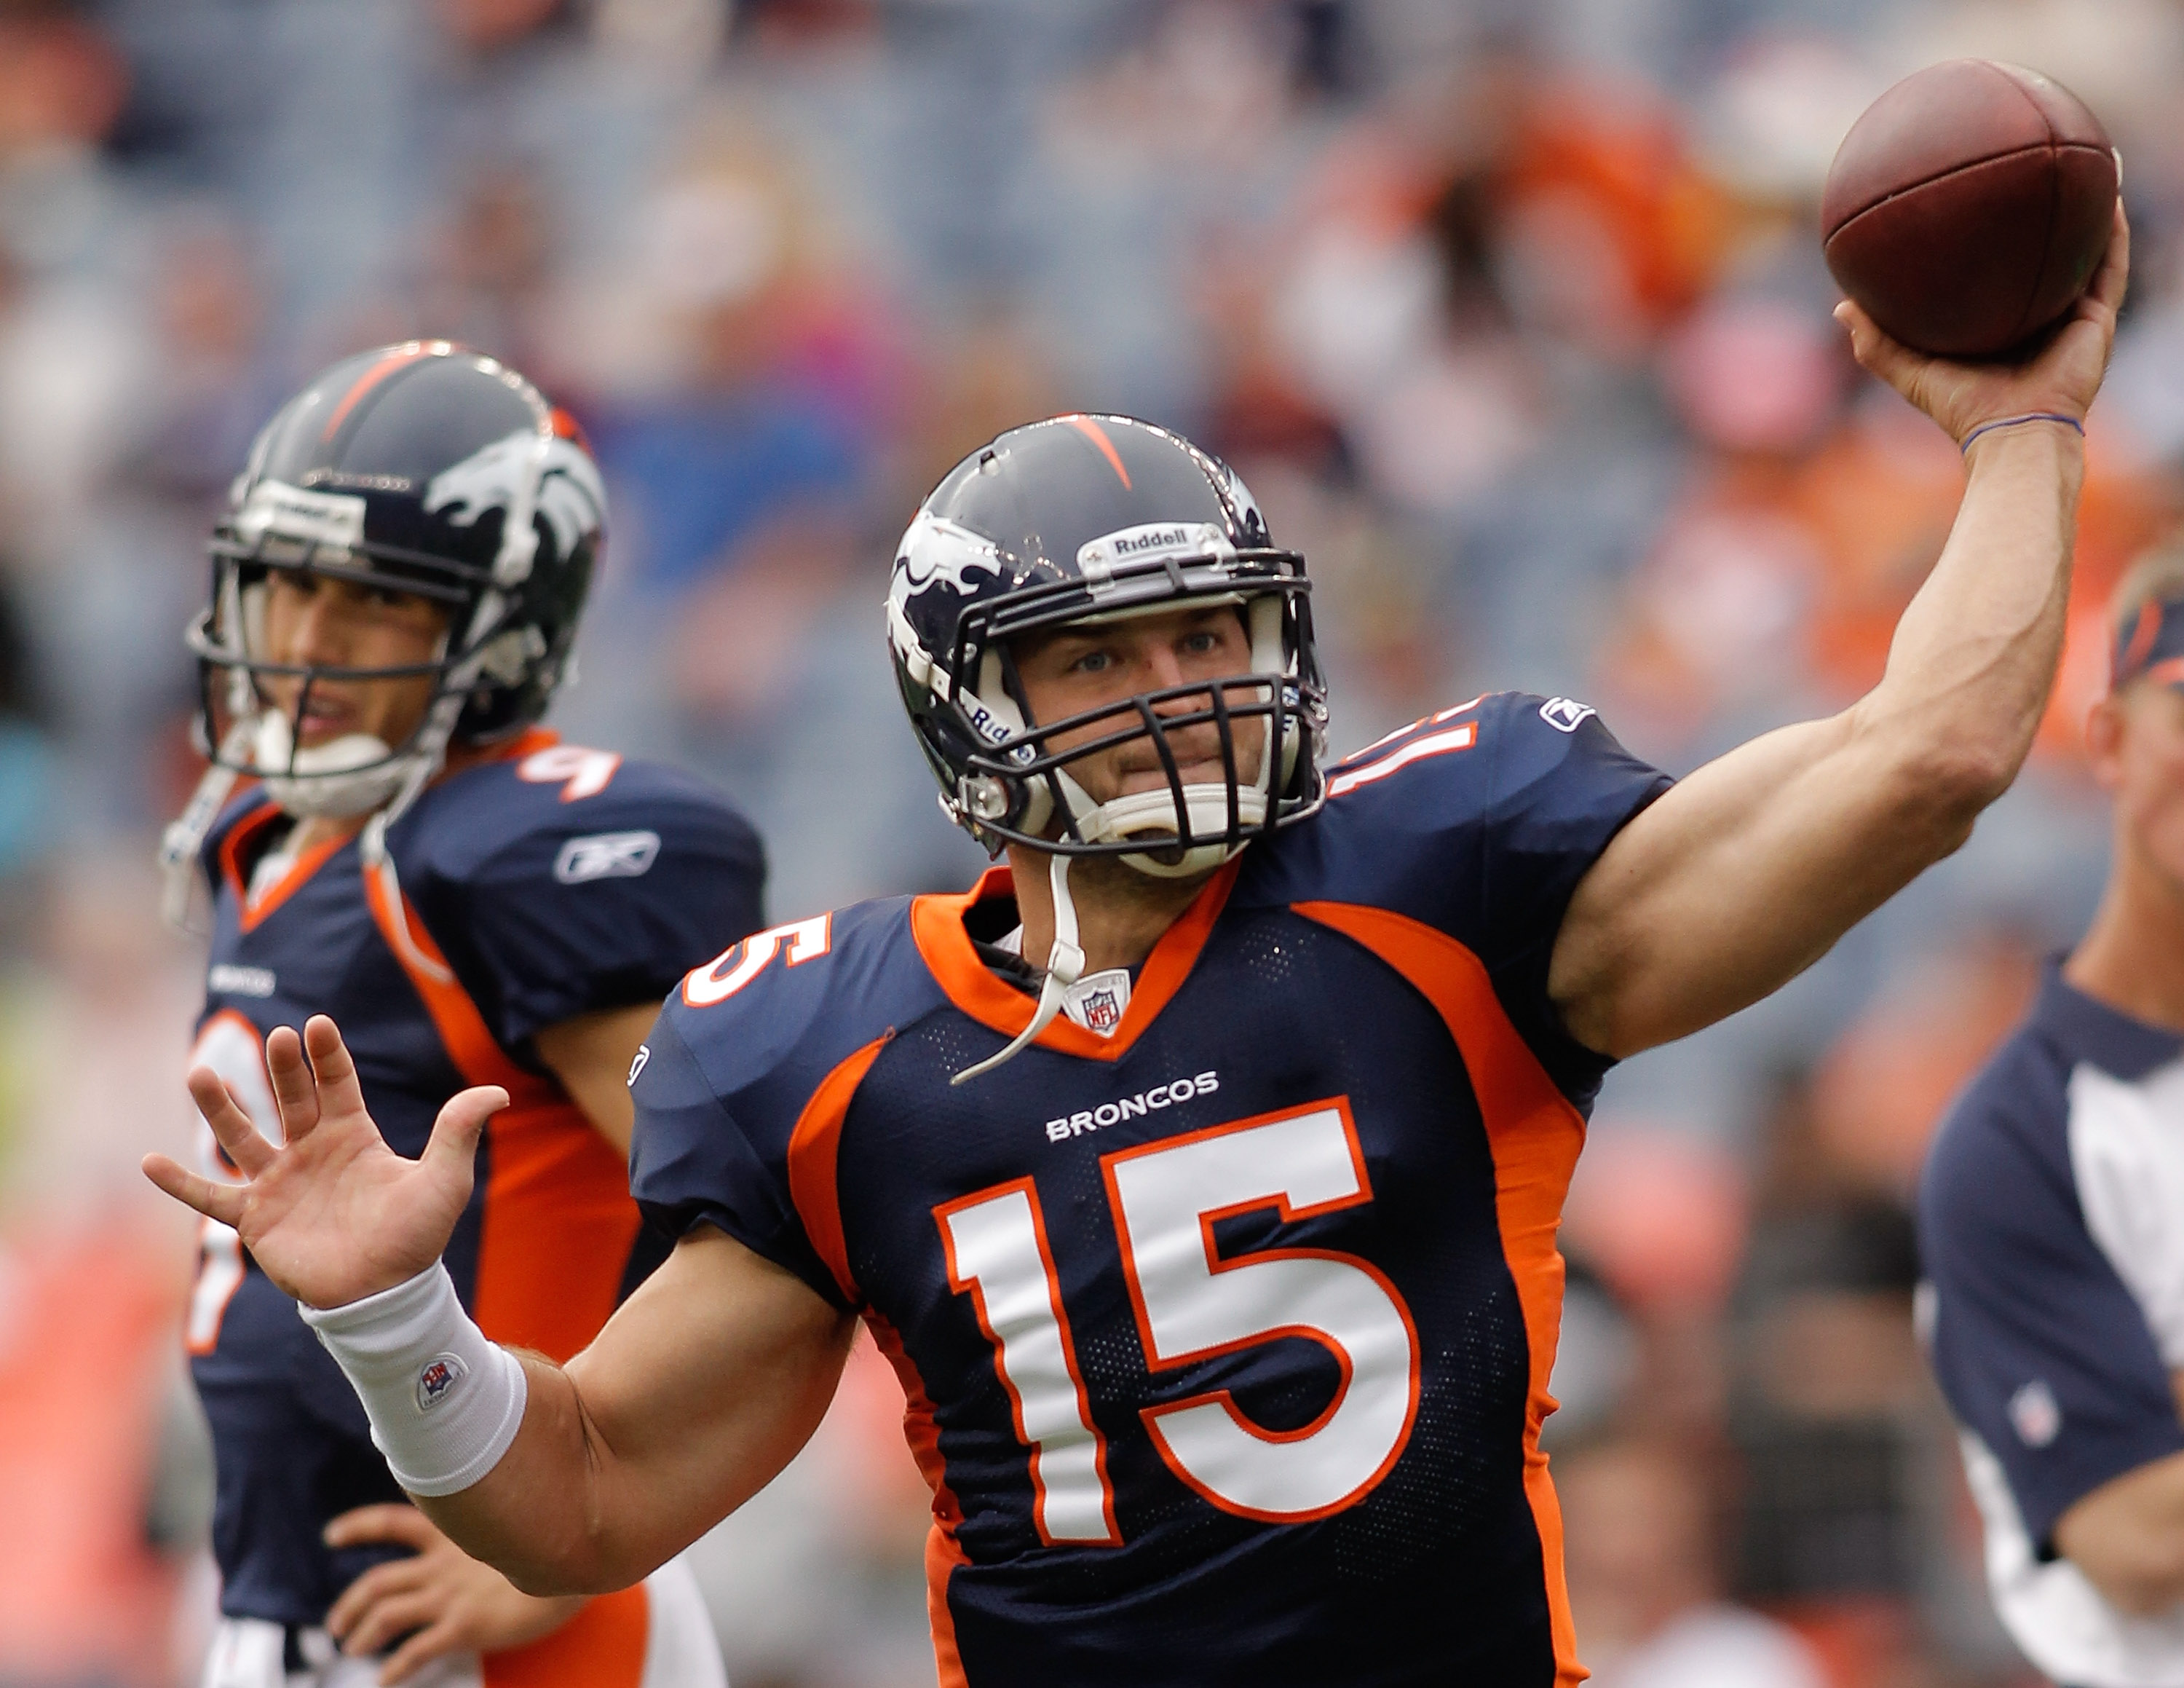 Is it time to start prepping Tebow for the future?